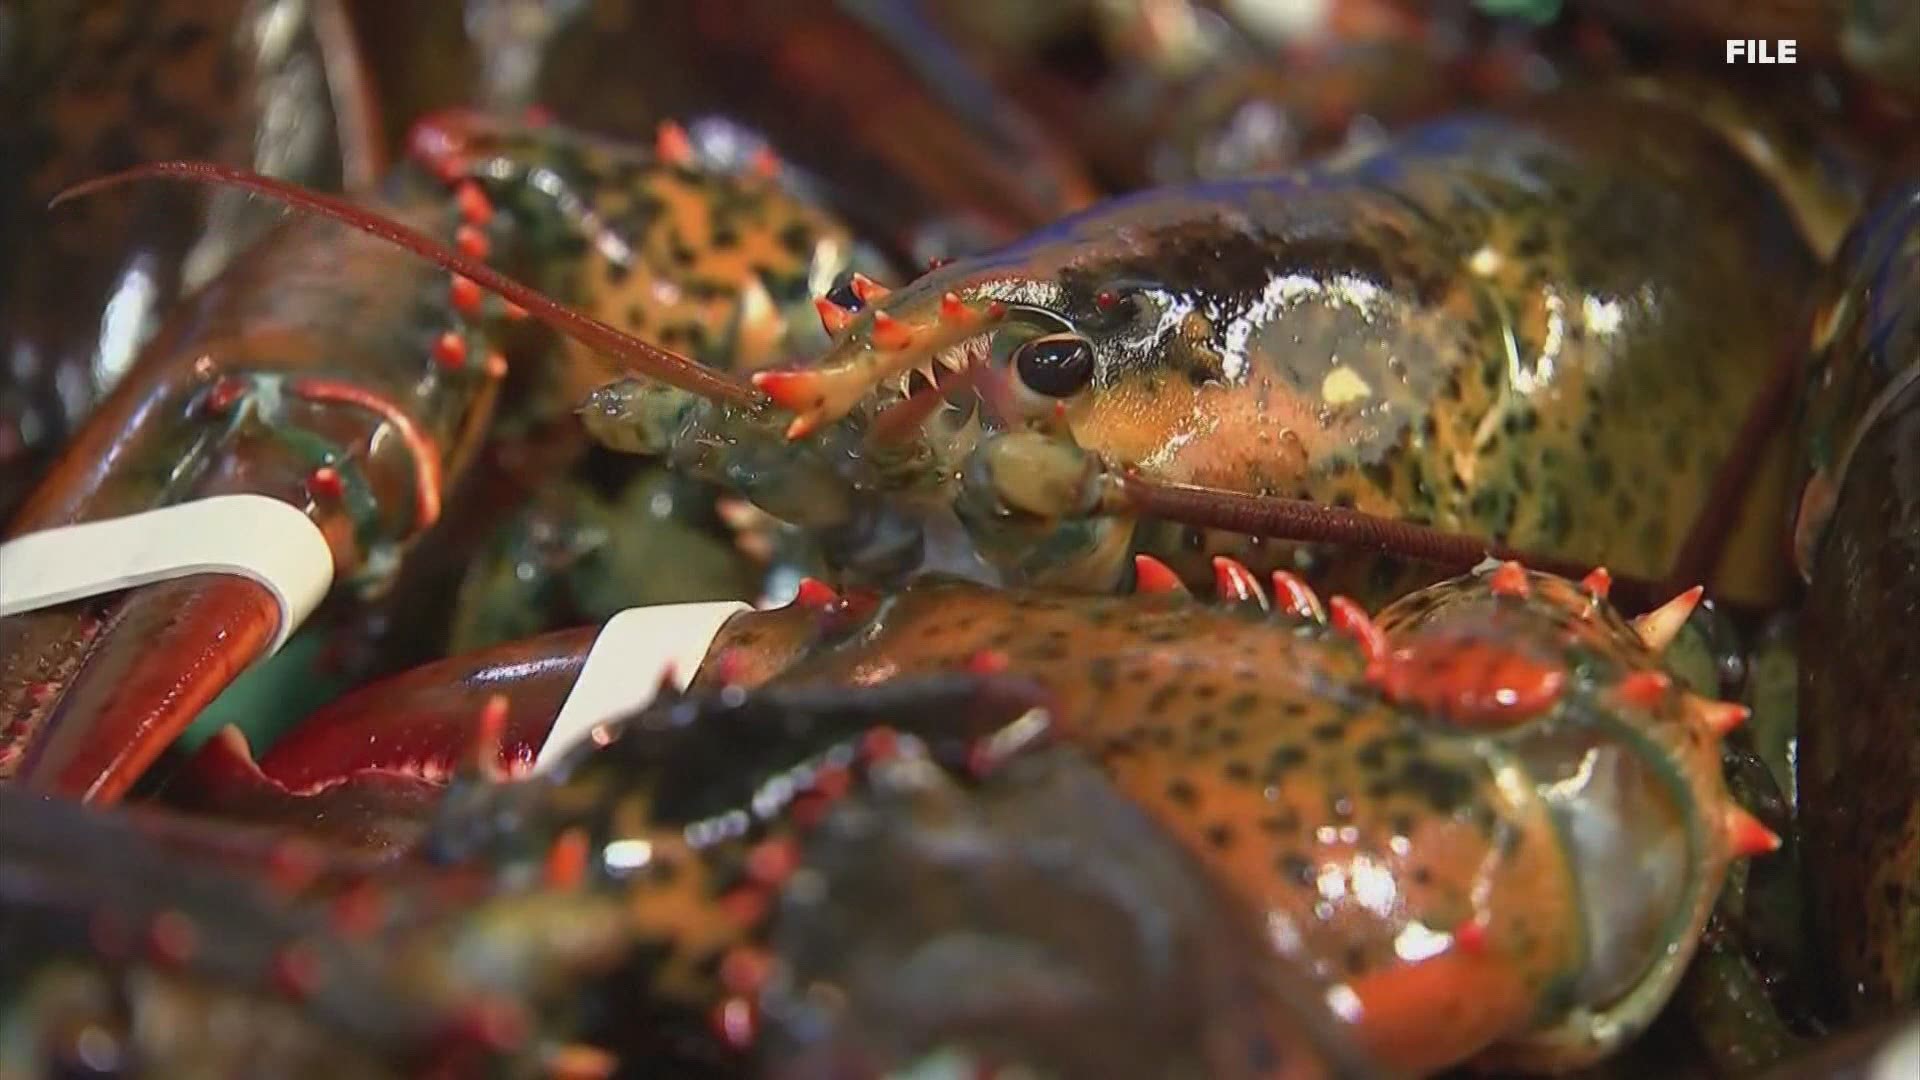 The Maine Department of Marine Resources said Wednesday fishermen caught more than 96 million pounds of lobsters in 2020